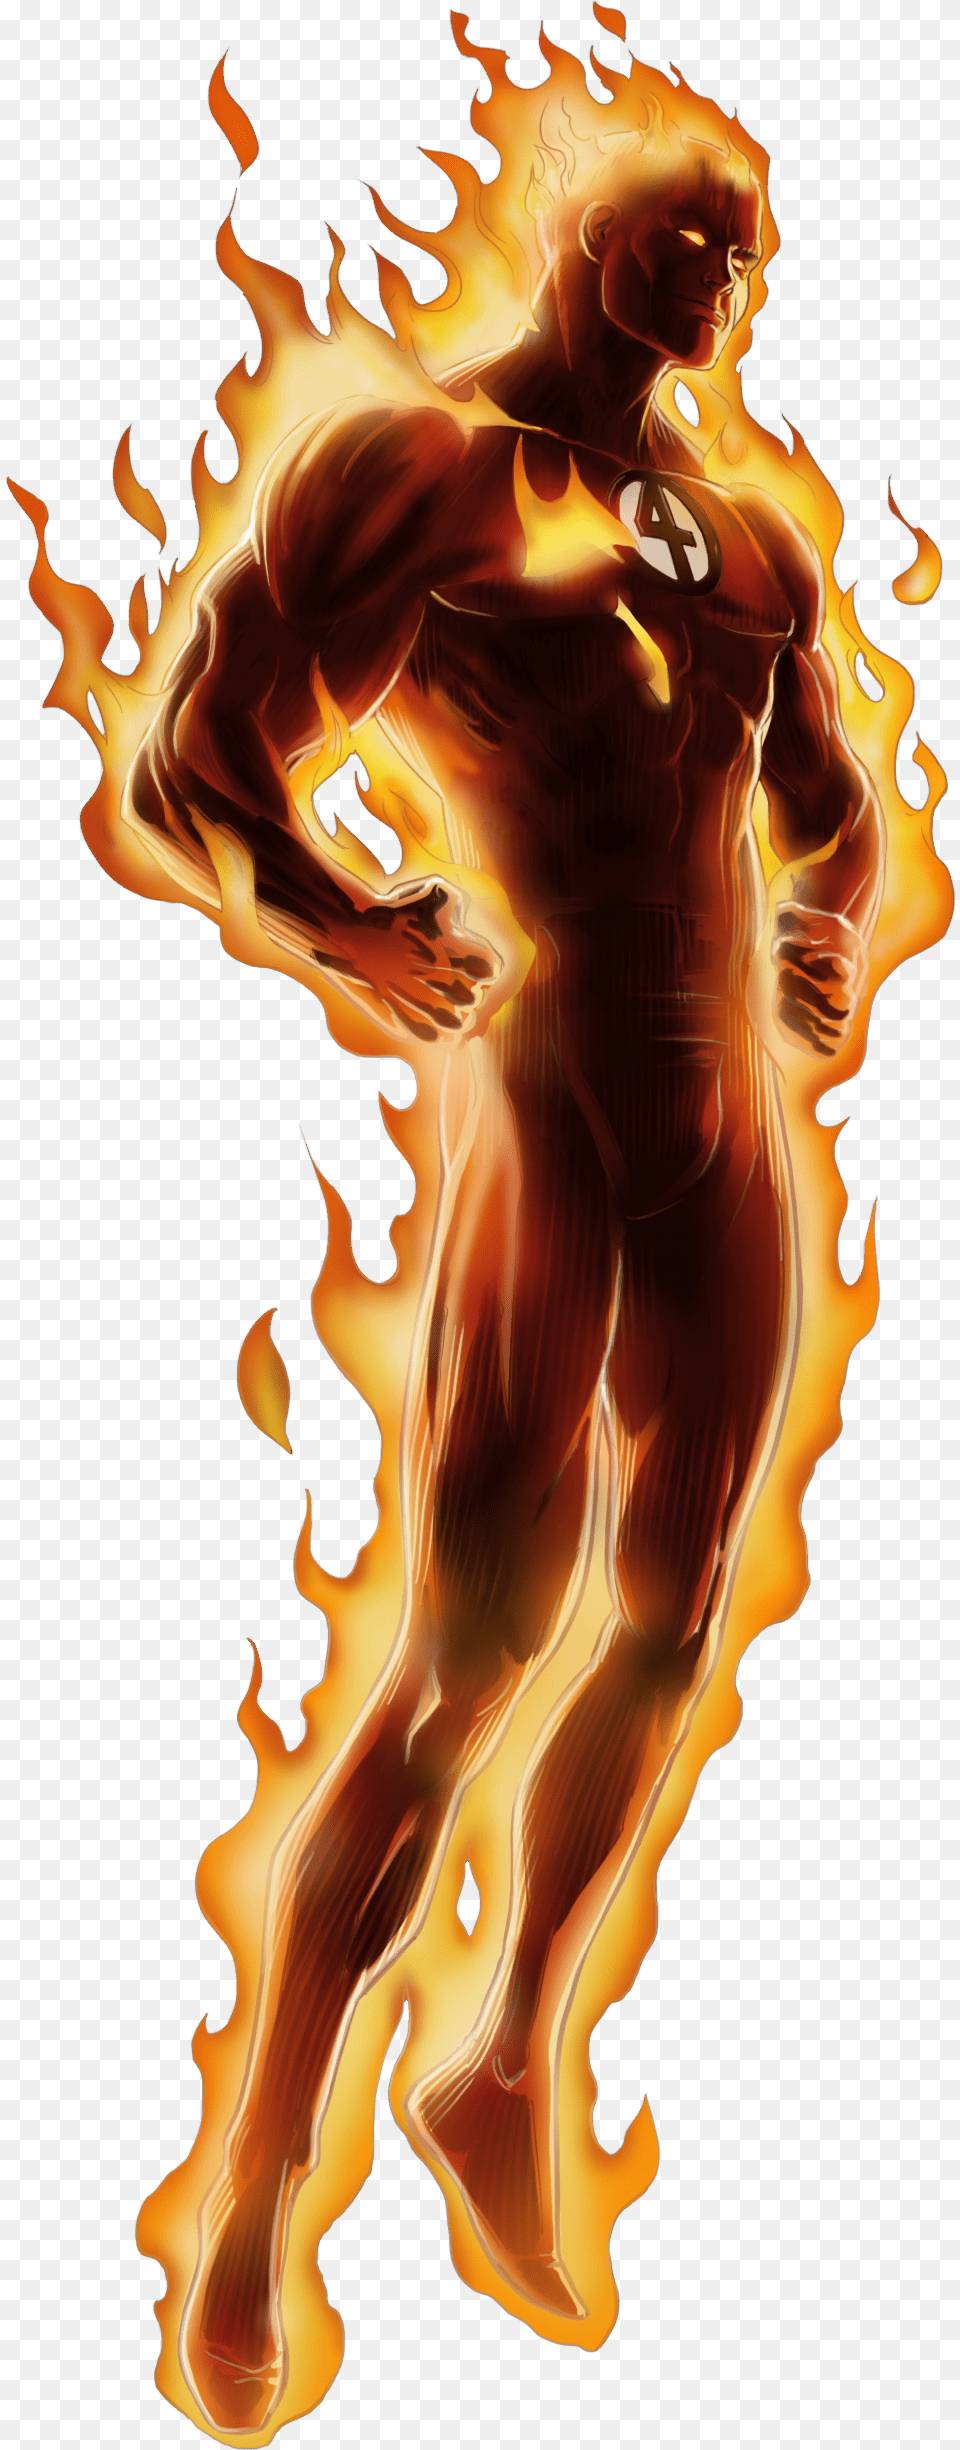 No Caption Provided No Caption Provided Human Torch, Fire, Flame, Adult, Male Png Image